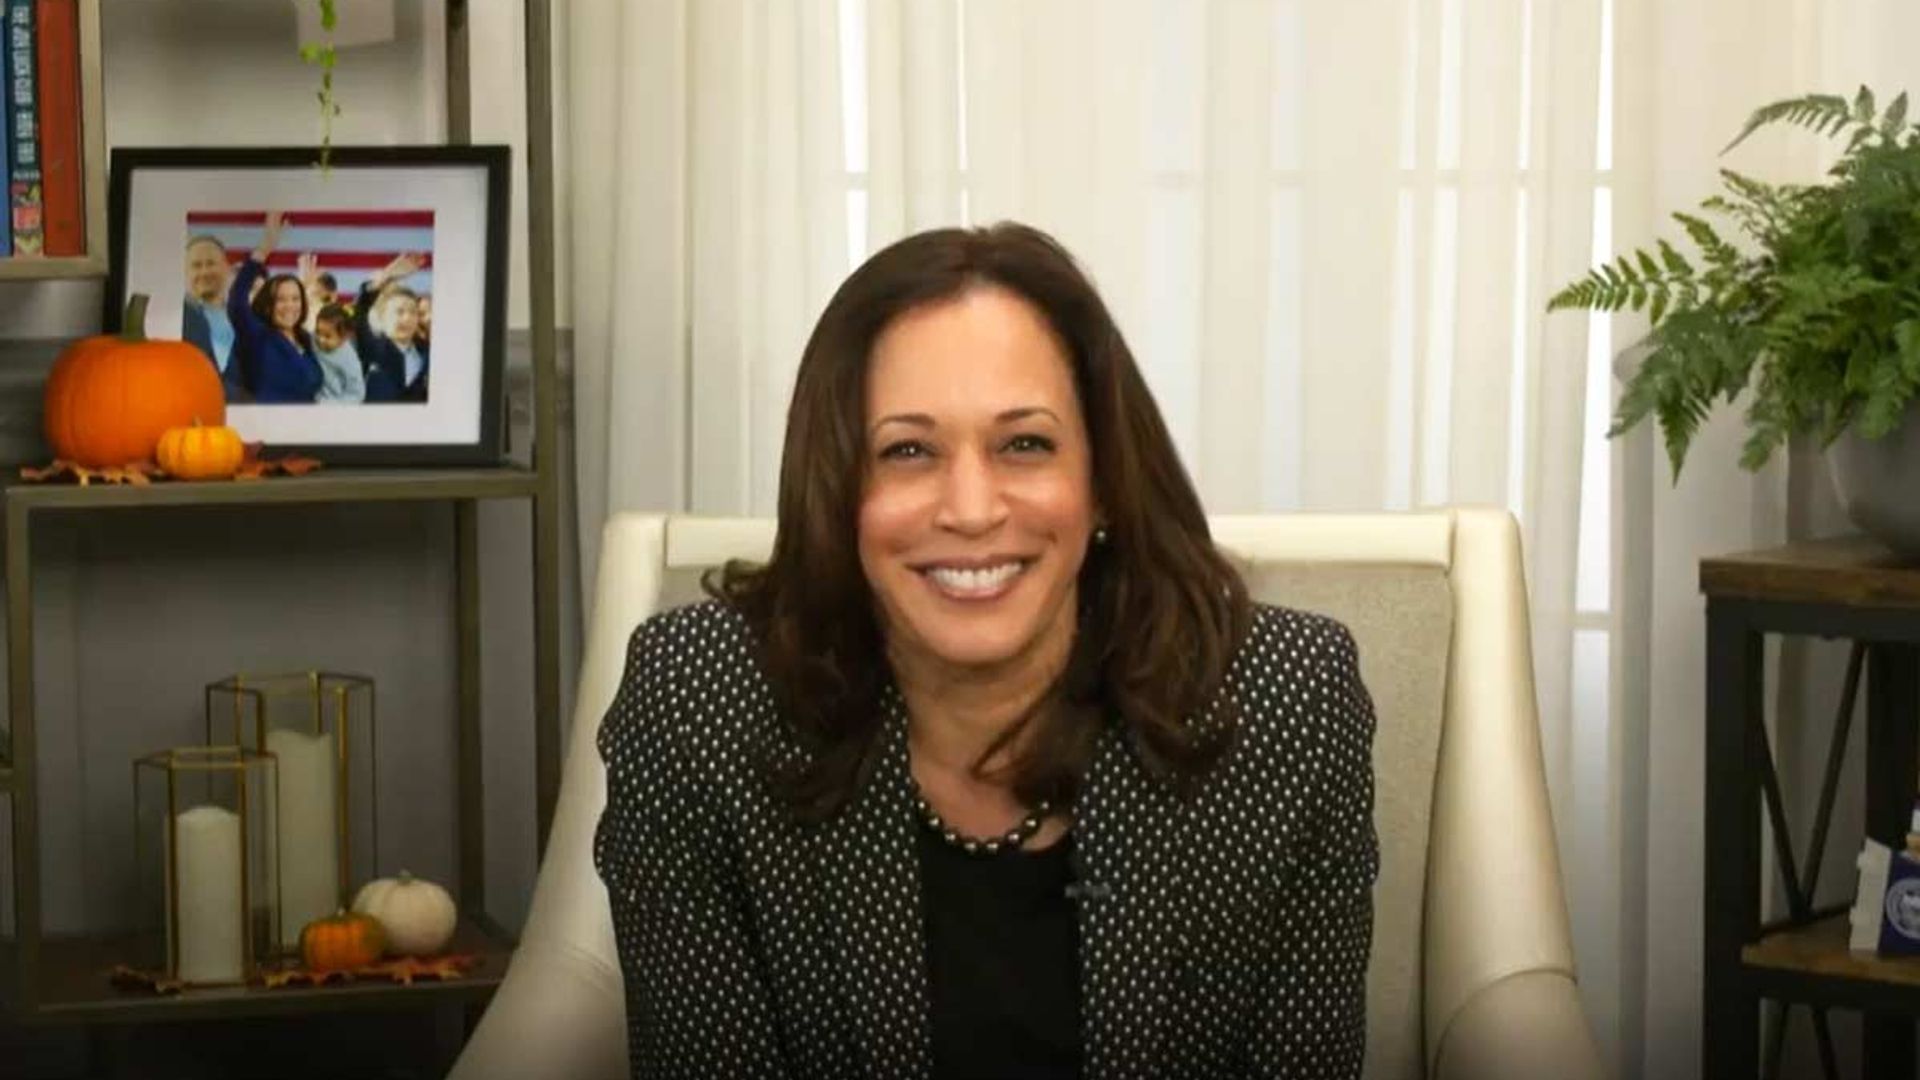 Kamala Harris' house is even more homely than the Obamas ...